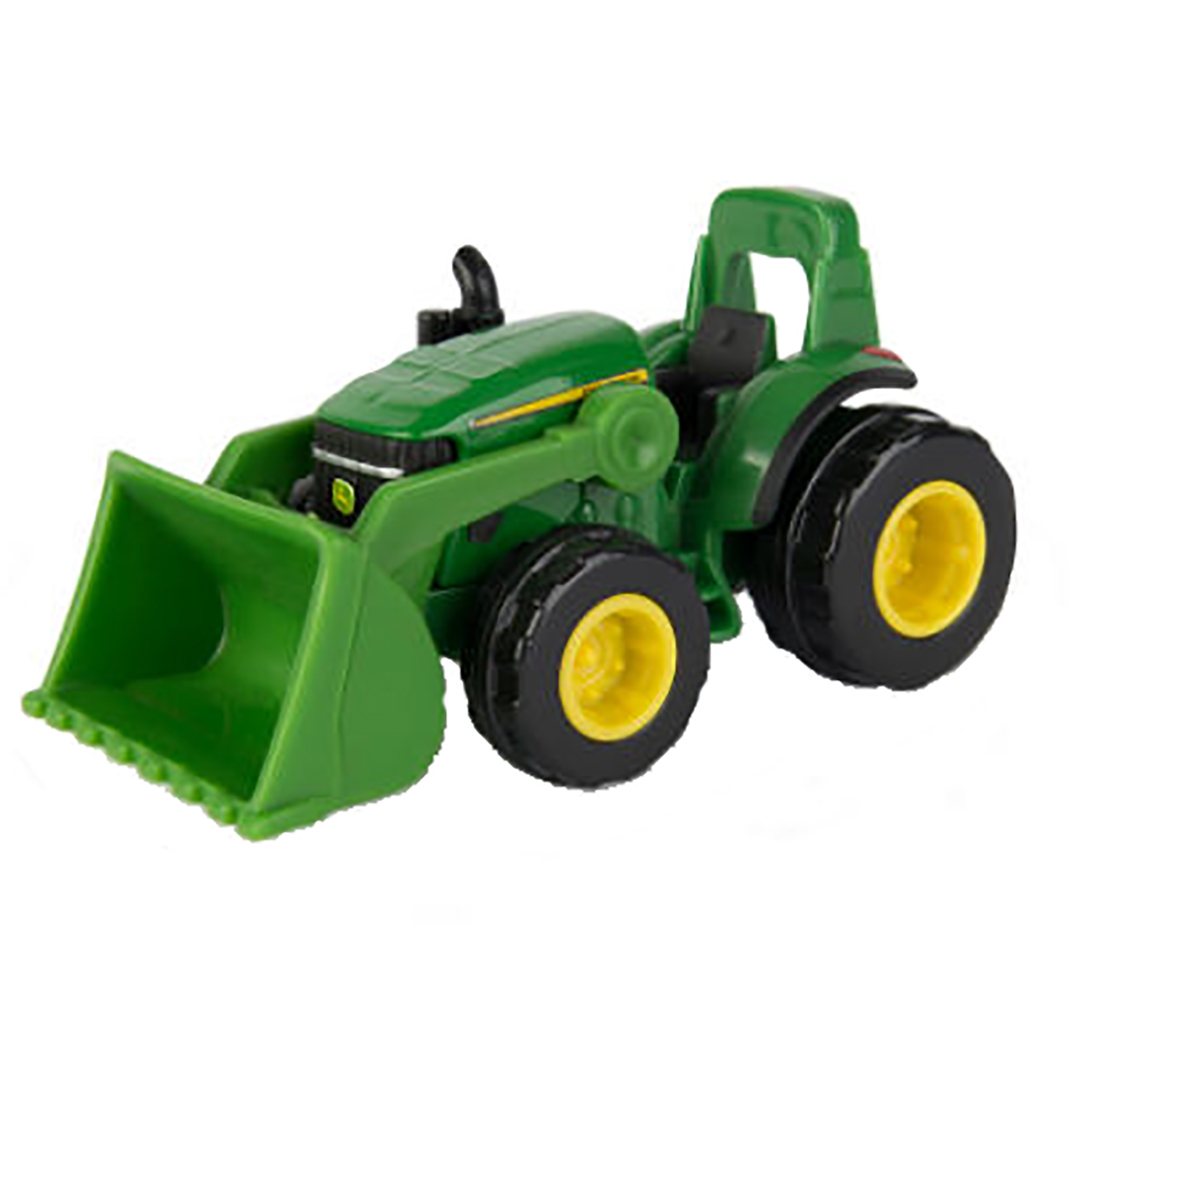 Tomy Collect-N-Play 1:32 Scale John Deere Tractor w/Loader 